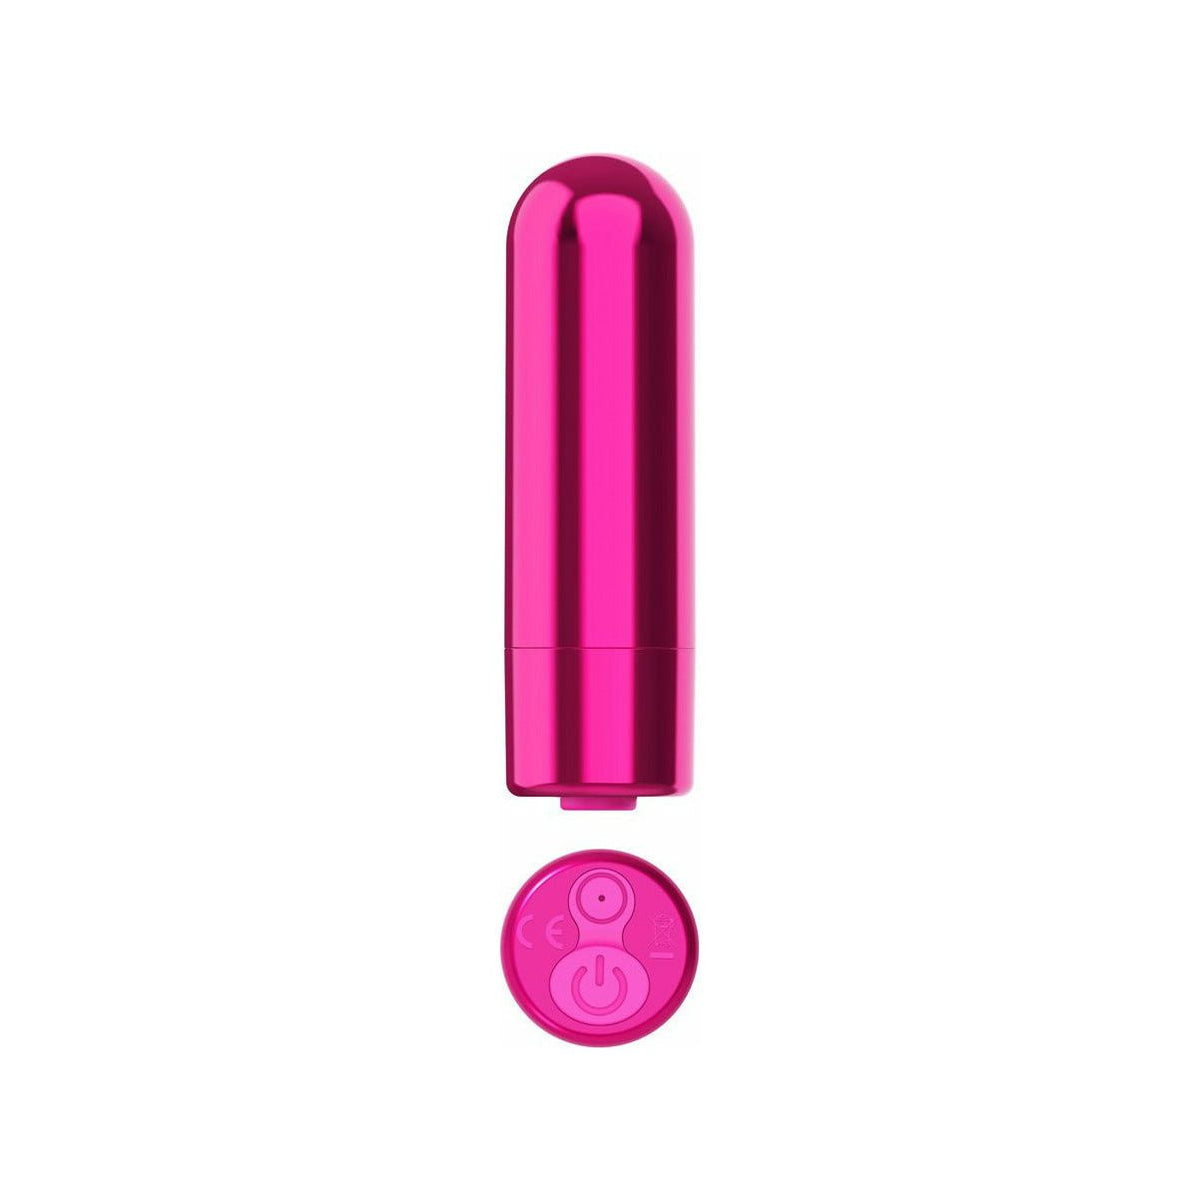 PowerBullet Rechargeable Mini Power Bullet – Clamshell - Pink